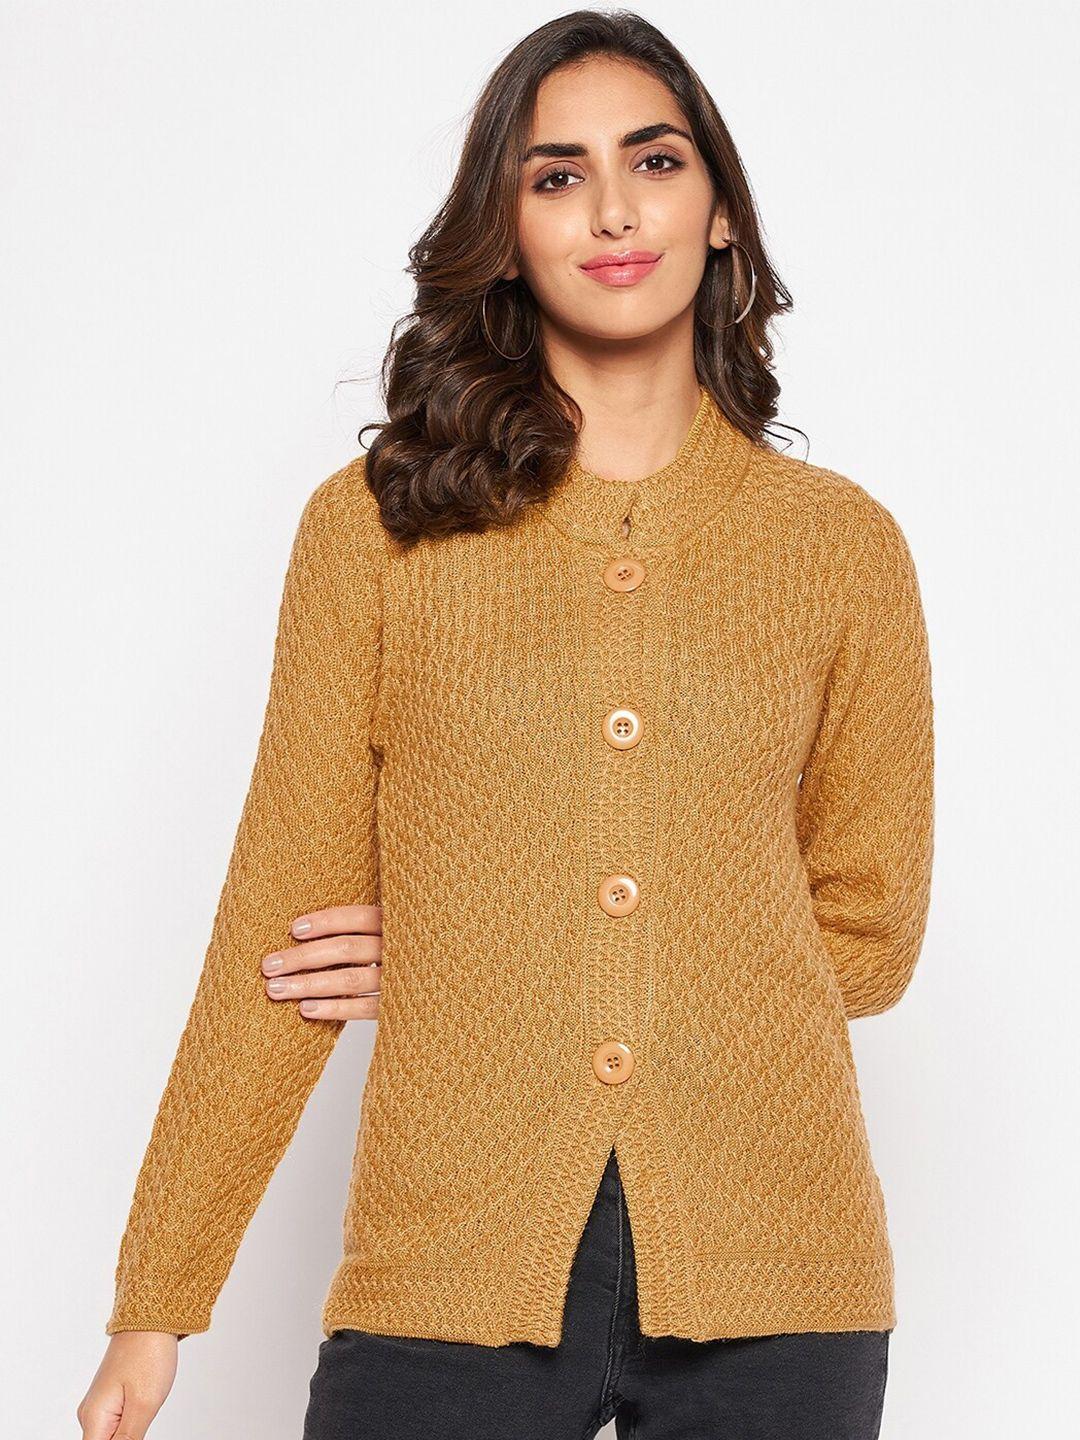 cantabil-women-mustard-cable-knit-cotton-cardigan